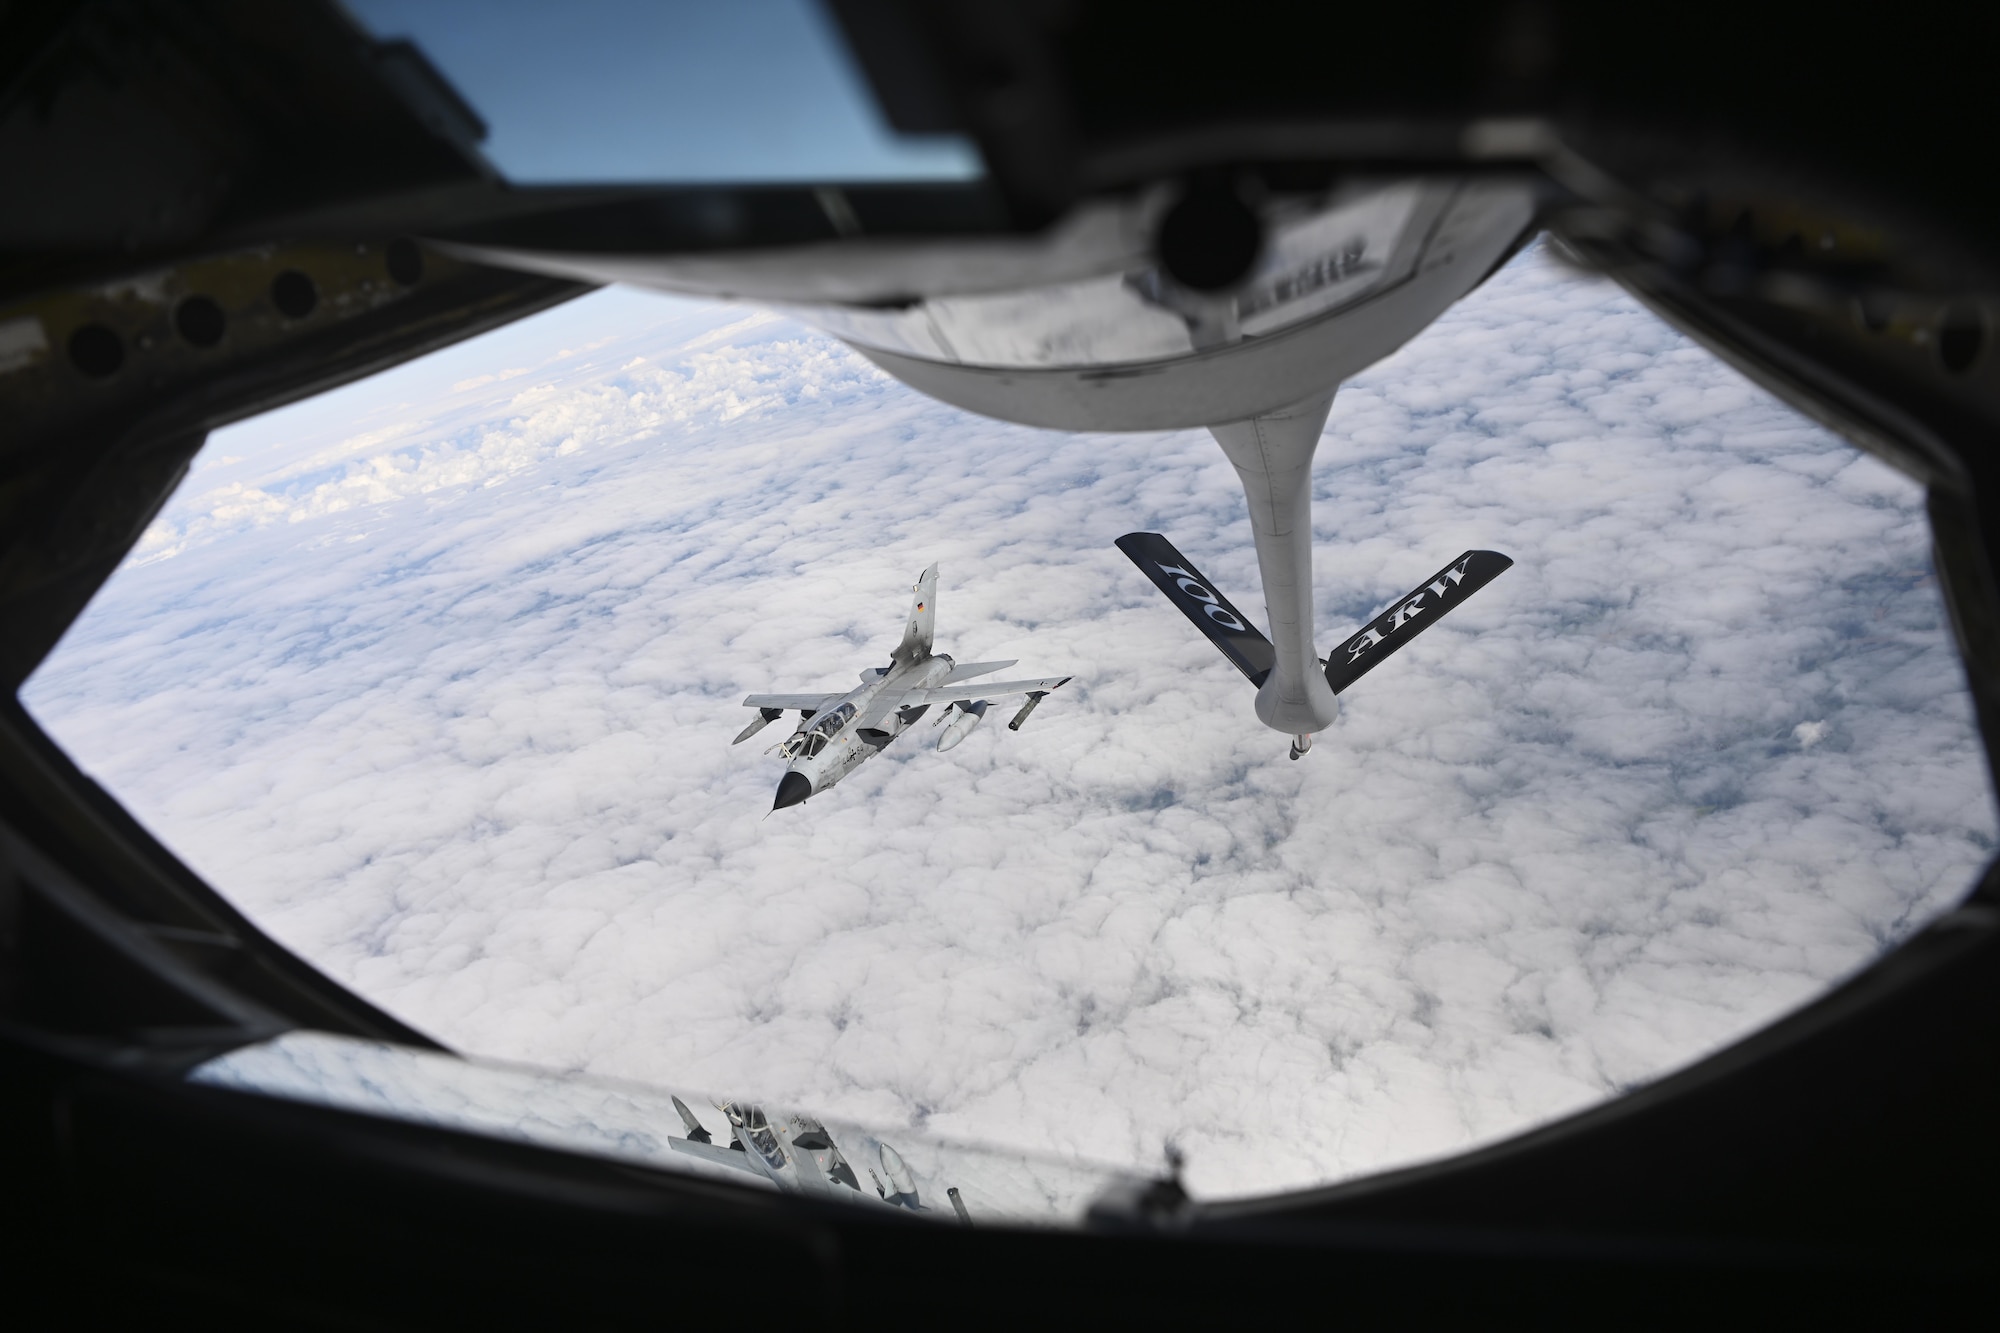 A German air force Tornado aircraft departs after receiving fuel from a U.S. Air Force KC-135 Stratotanker aircraft assigned to the 100th Air Refueling Wing, Royal Air Force Mildenhall, England, over Germany Aug. 2, 2021. Training with European allies enhances the collective security of the continent. (U.S. Air Force photo by Senior Airman Joseph Barron)